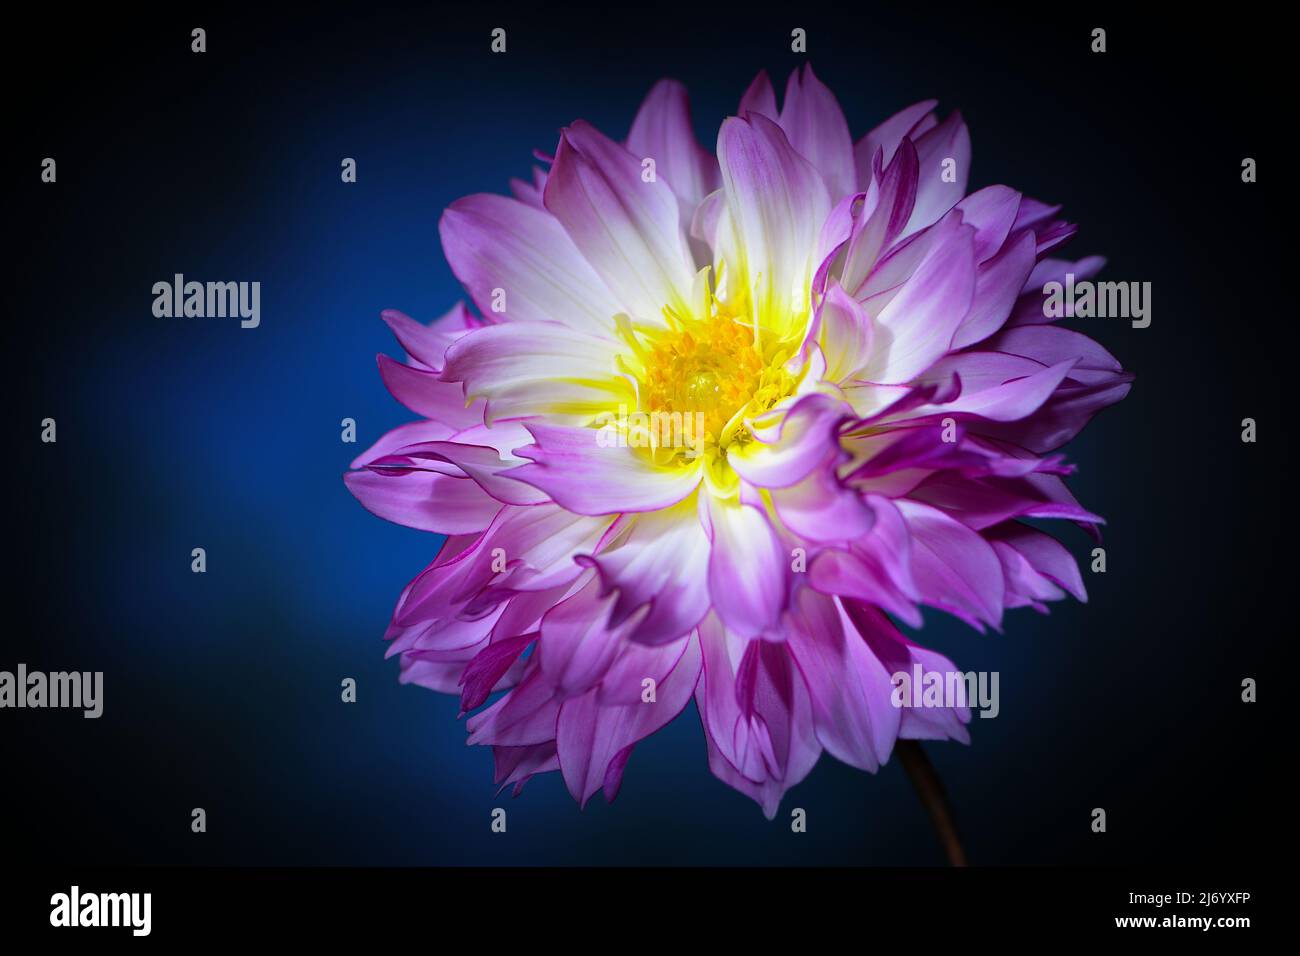 A vibrant pink Dahlia -Asteraceae family- flower with an ochre coloured centre in full bloom in dark blue mood lighting; captured in a Studio Stock Photo